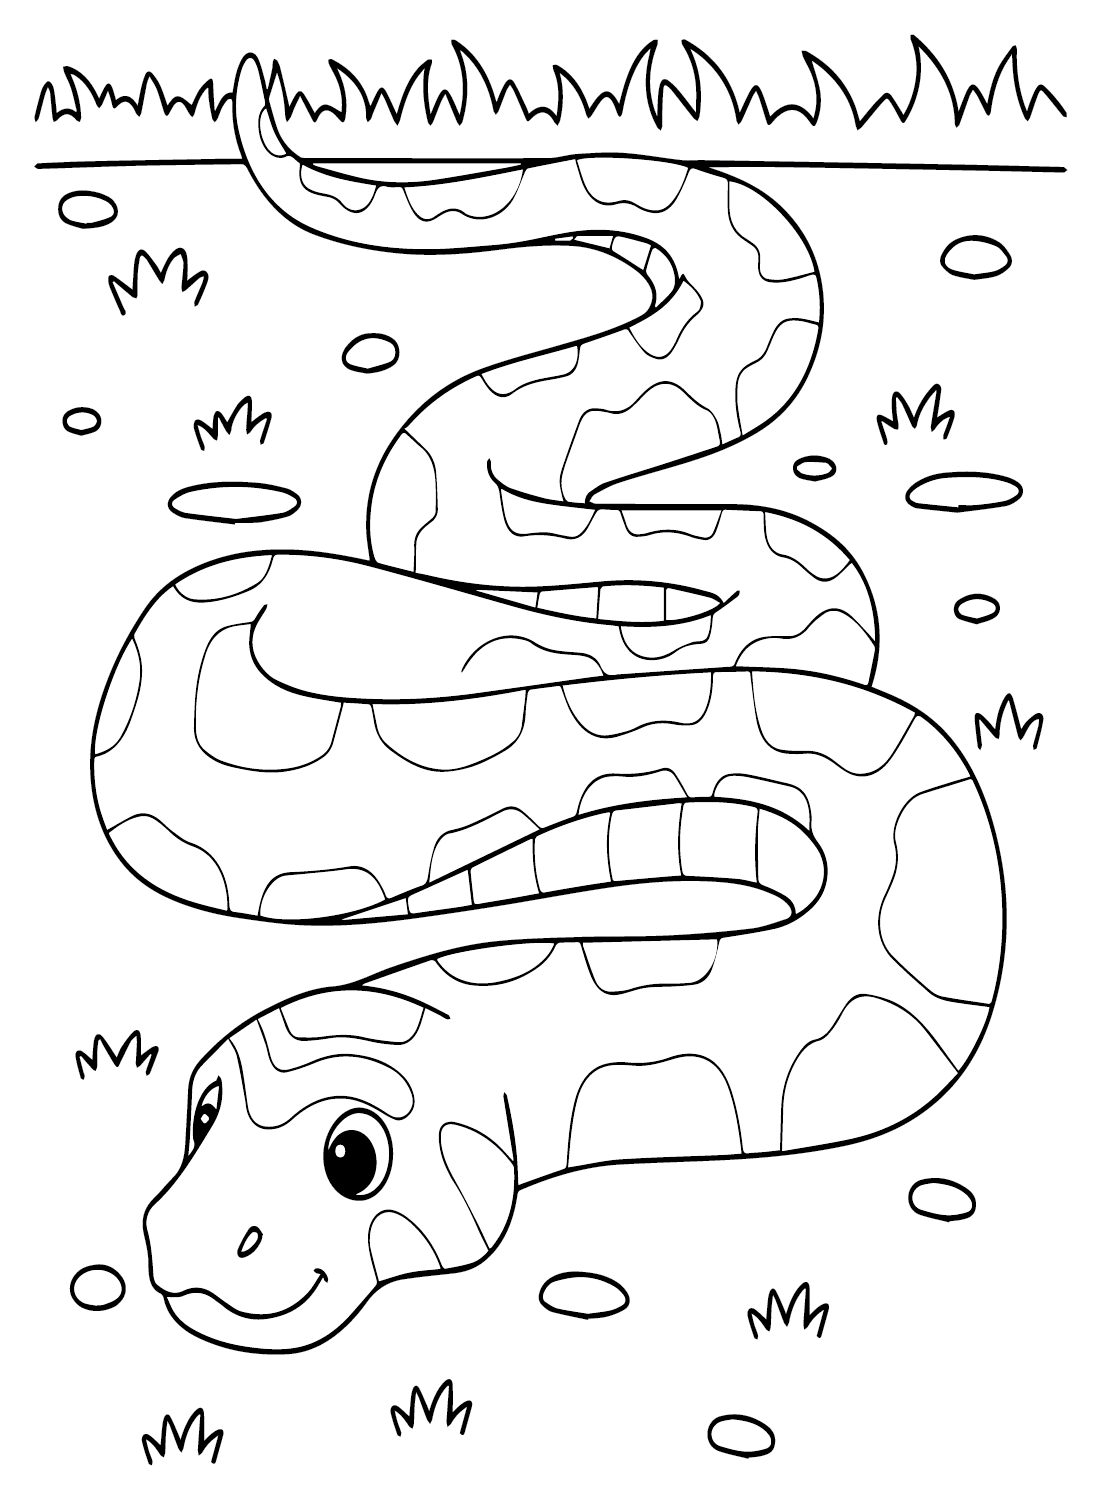 Picture of Anaconda Coloring Page from Anaconda